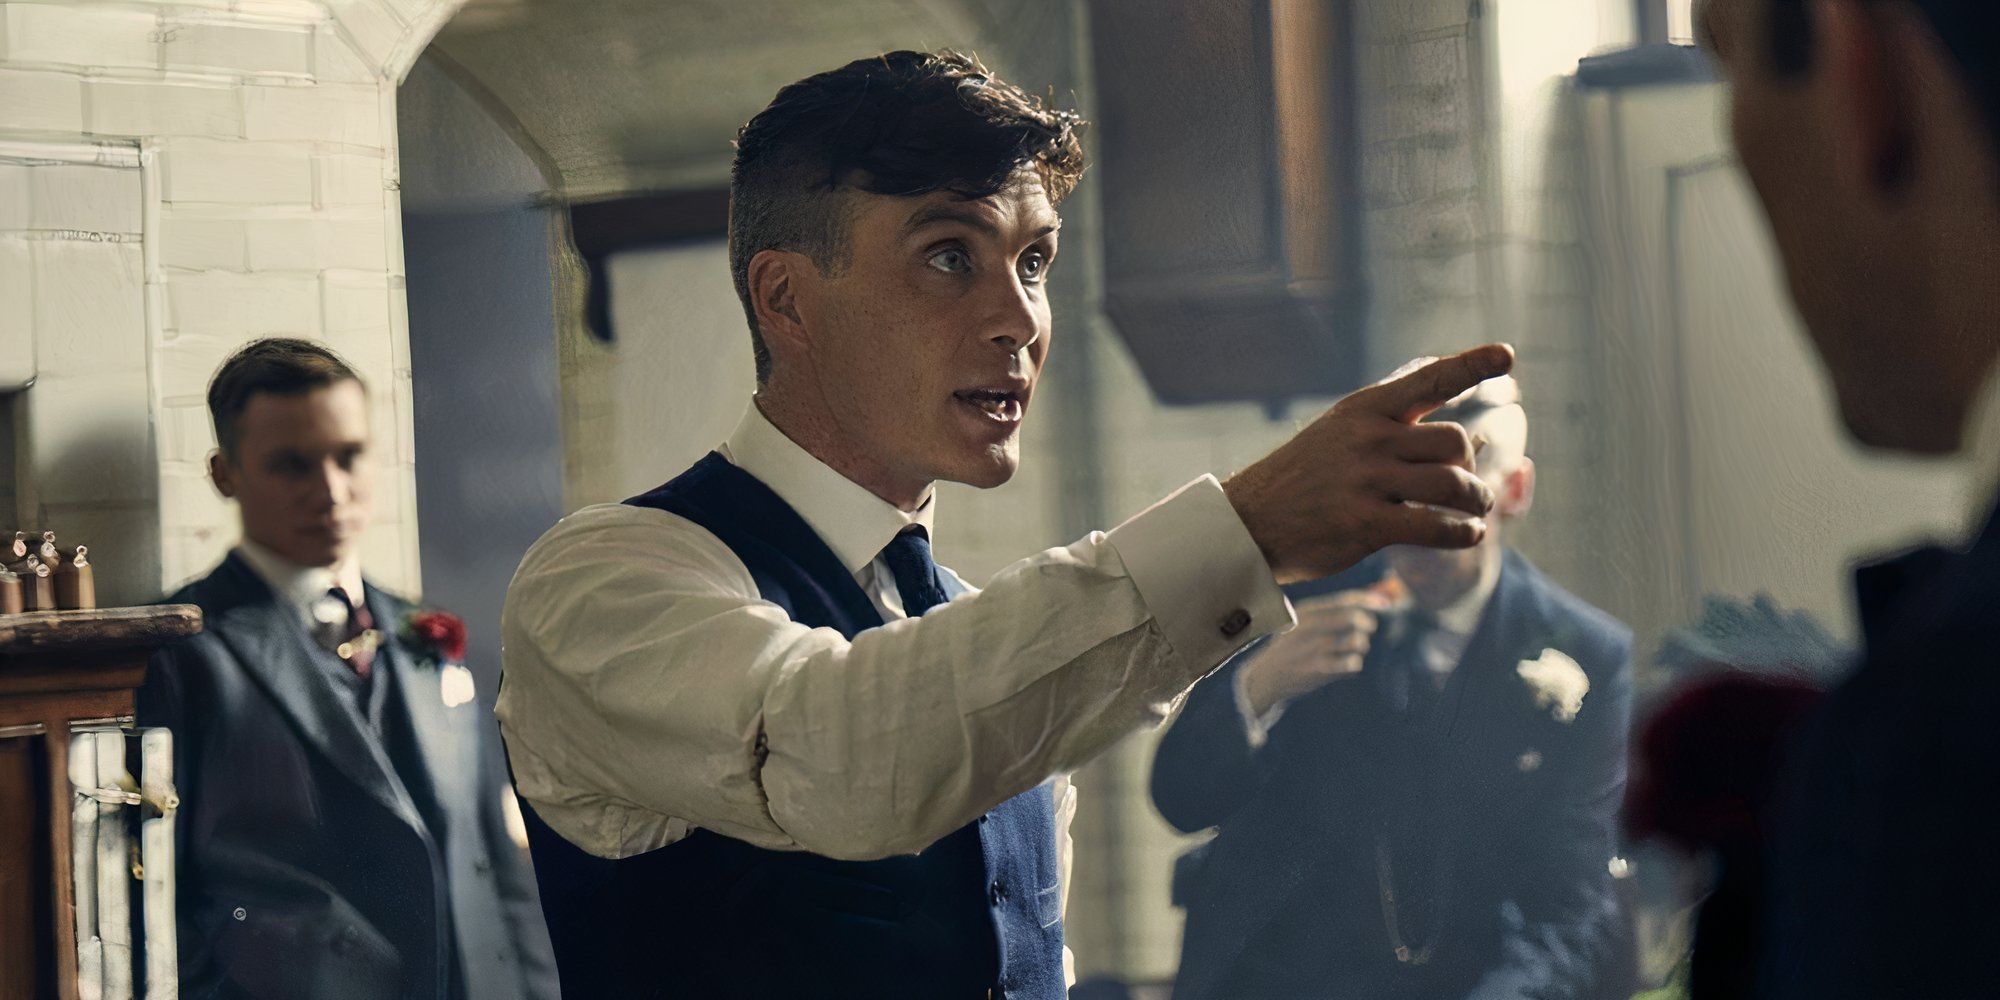 Cillian Murphy as Tommy Shelby pointing at a man in Peaky Blinders.